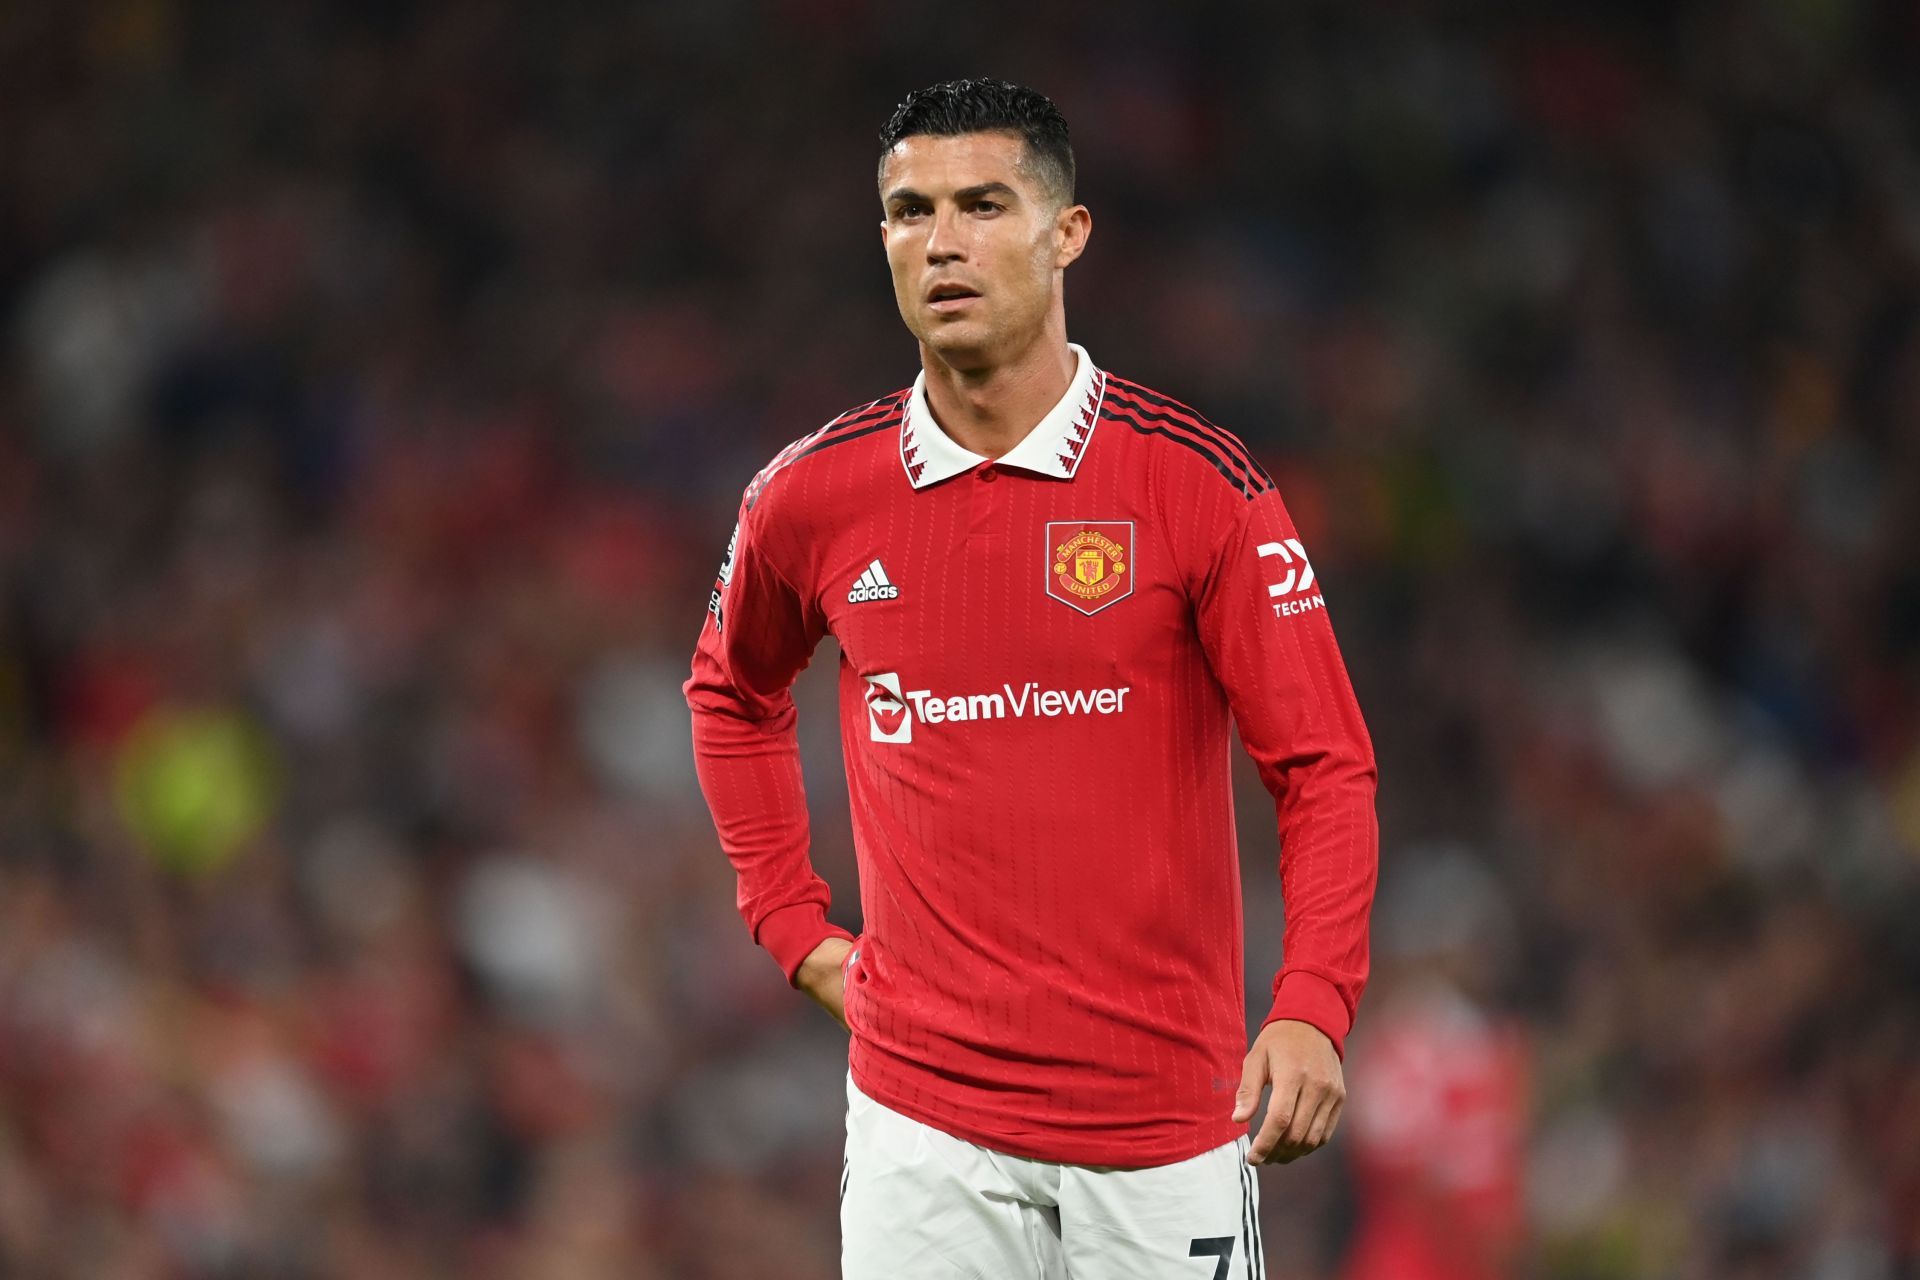 Cristiano Ronaldo continues to be linked with an exit from Old Trafford/